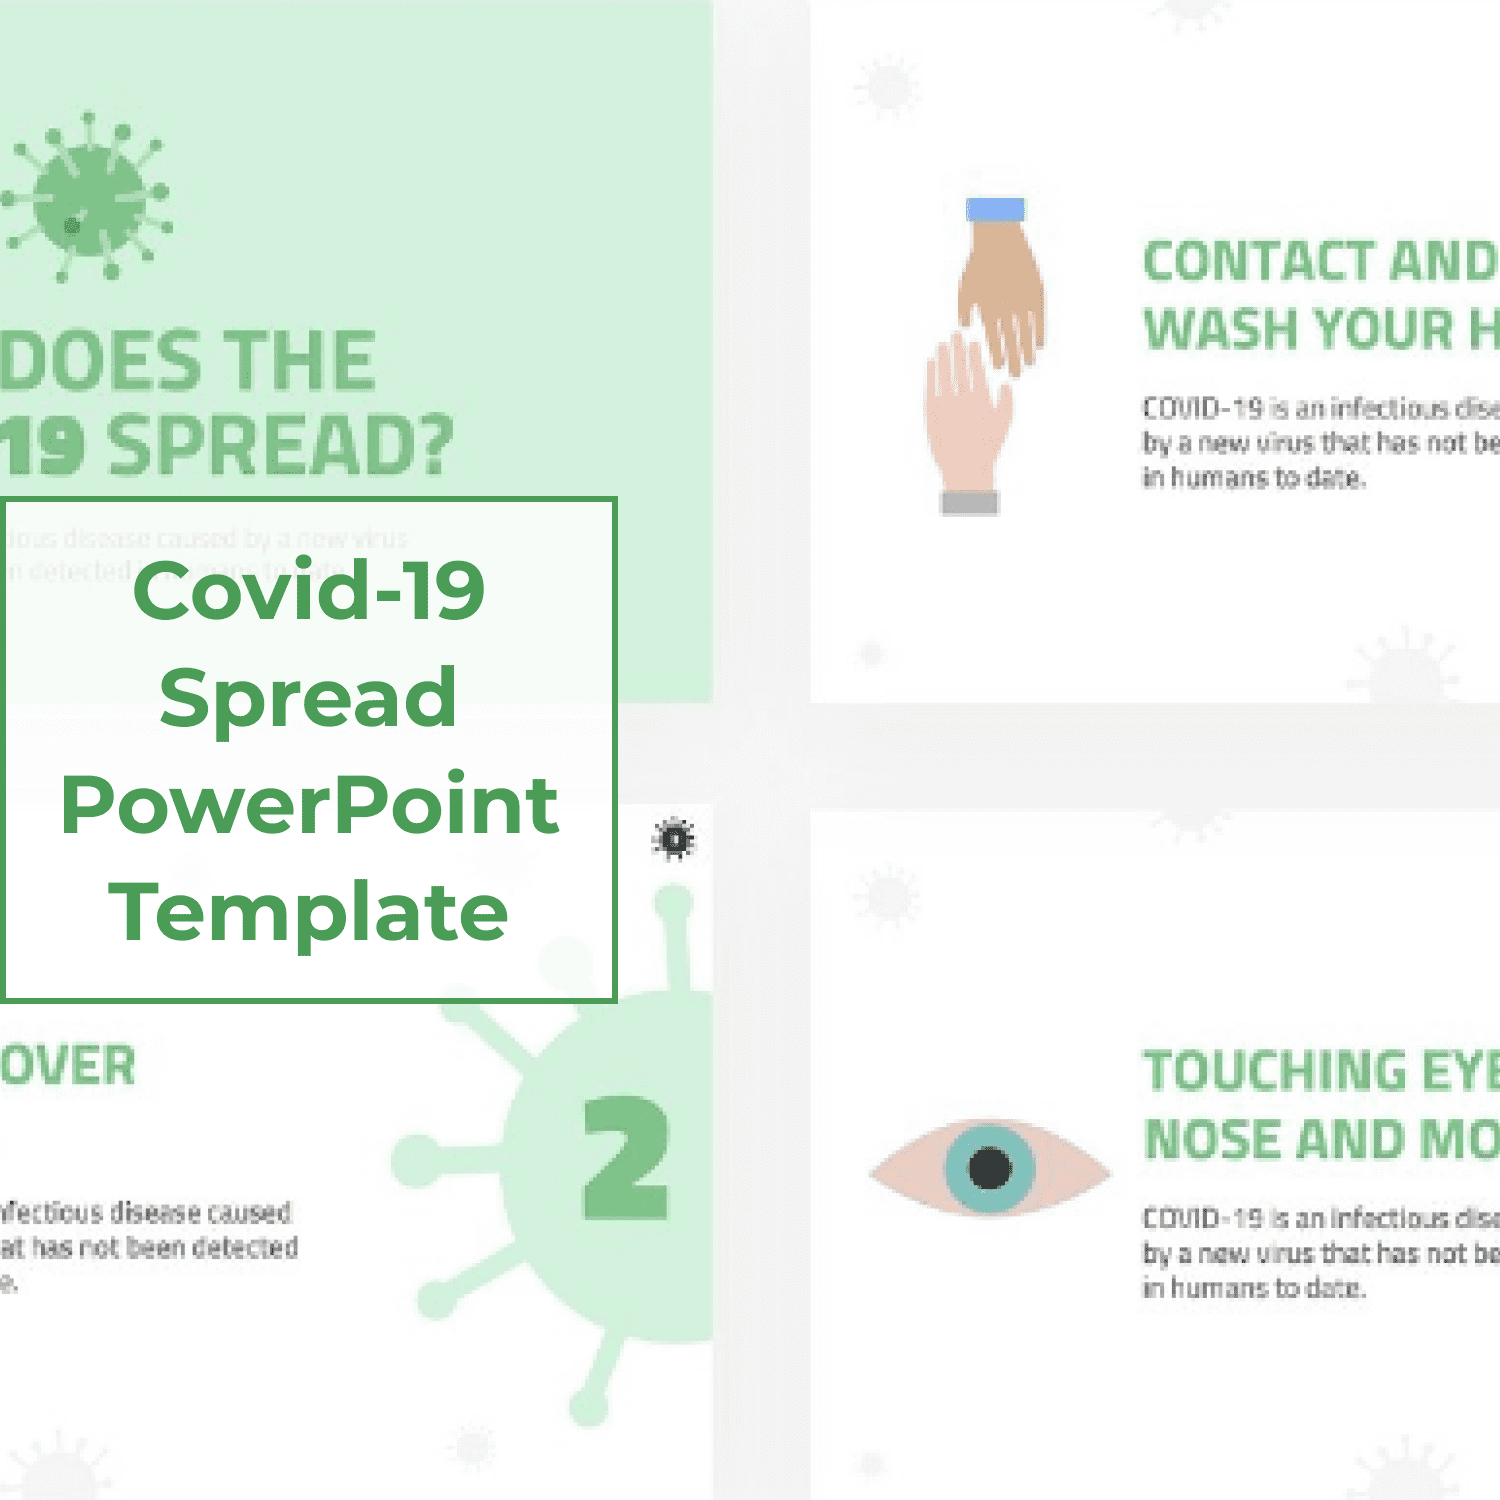 Covid-19 Spread PowerPoint Template main cover.